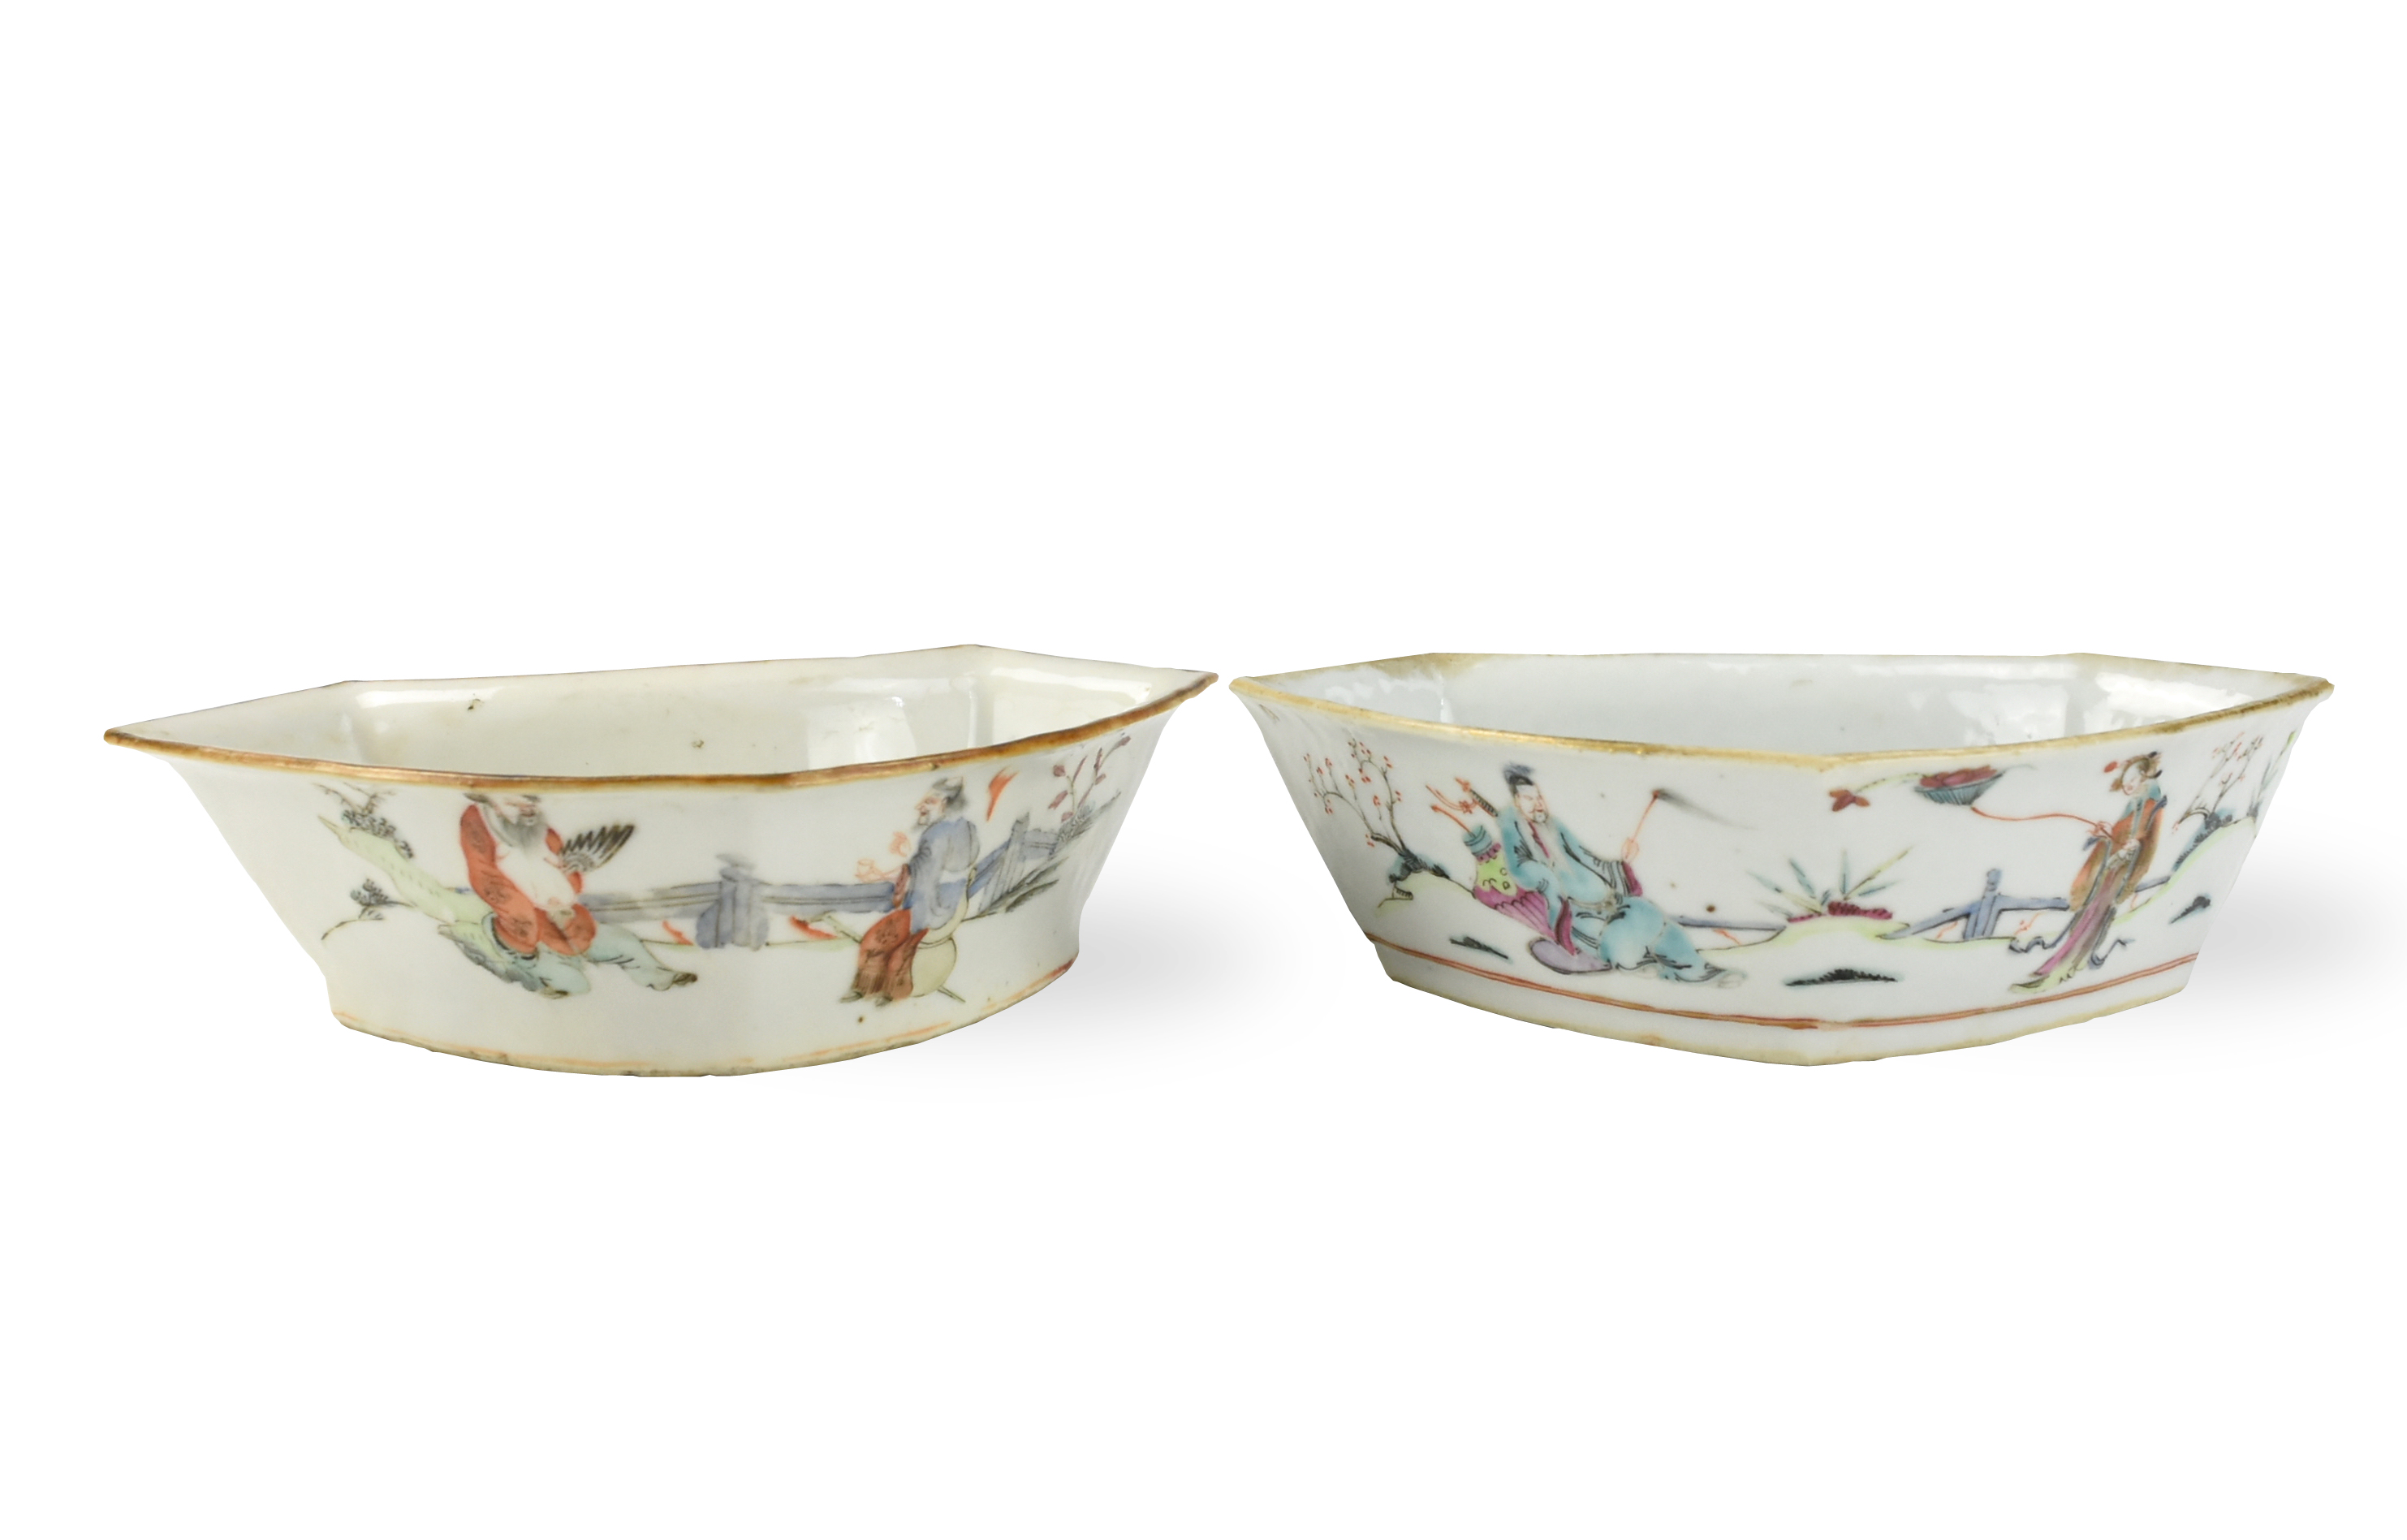 TWO CHINESE FAMILLE ROSE BOWLS